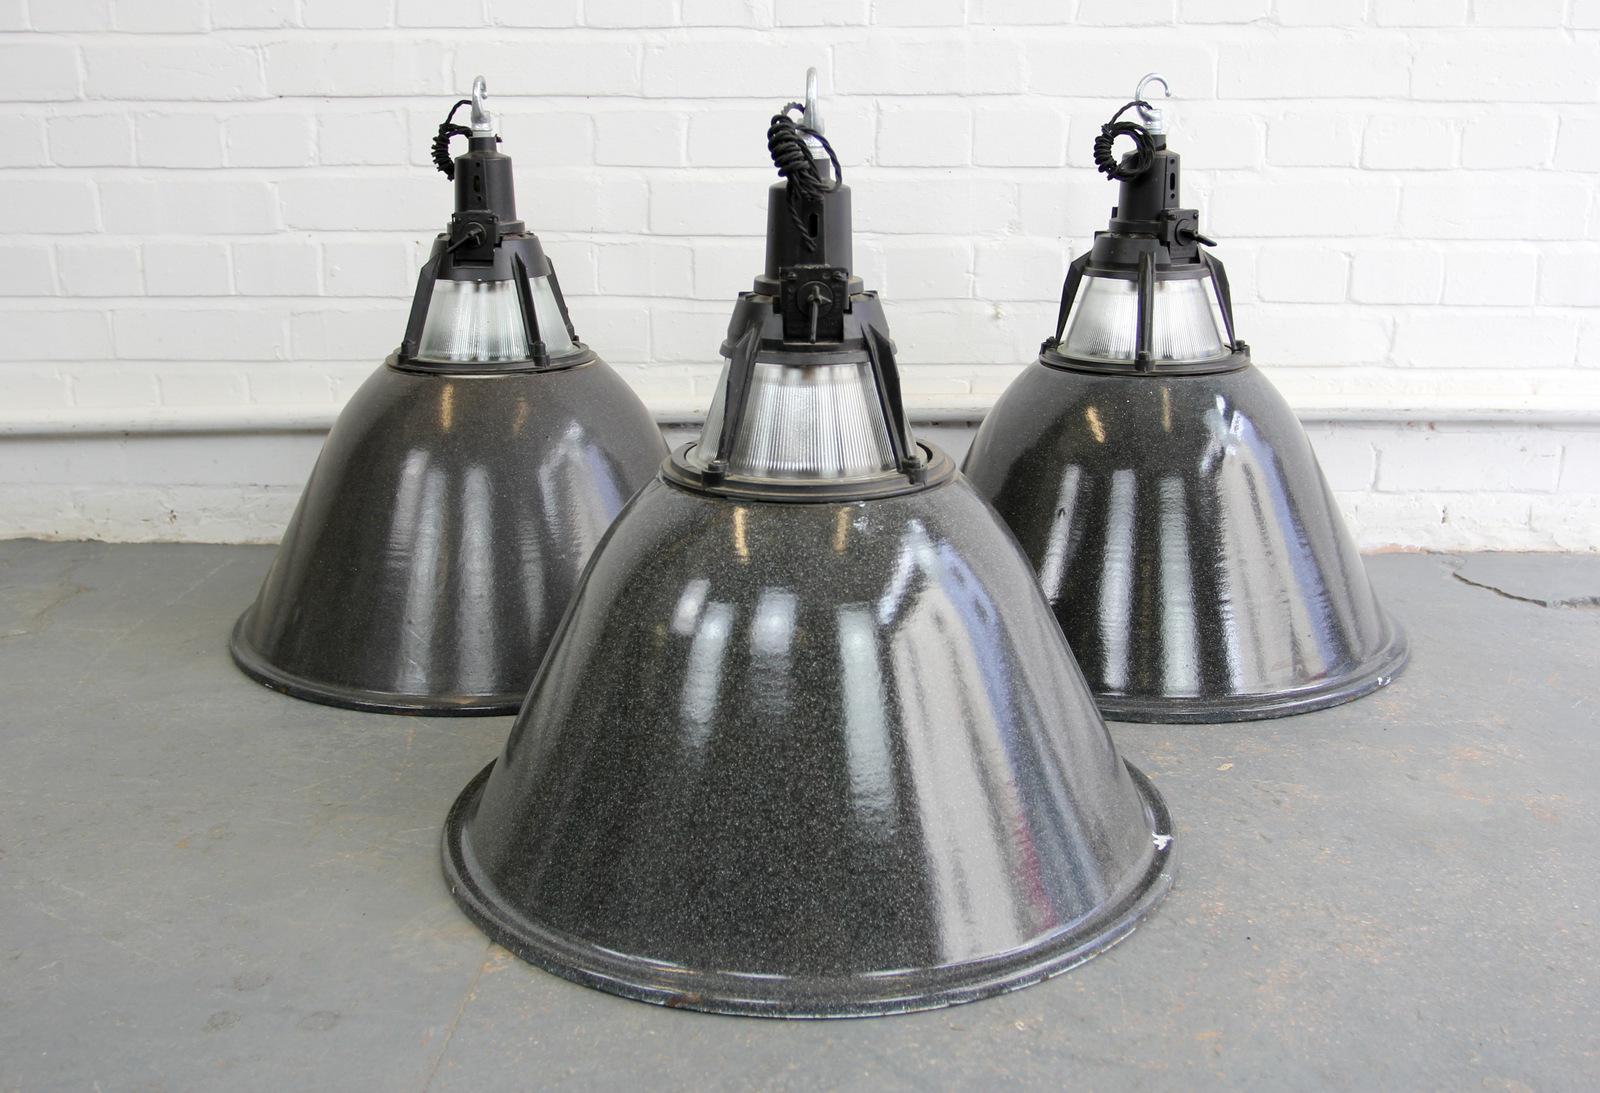 Large Soviet Industrial factory lights, circa 1950s

- Vitreous black enamel outers with white enamel inner reflectors
- Prismatic glass diffuser at the top of the lamps
- Fully re wired with new bulb holders and cable
- Comes with 100cm of